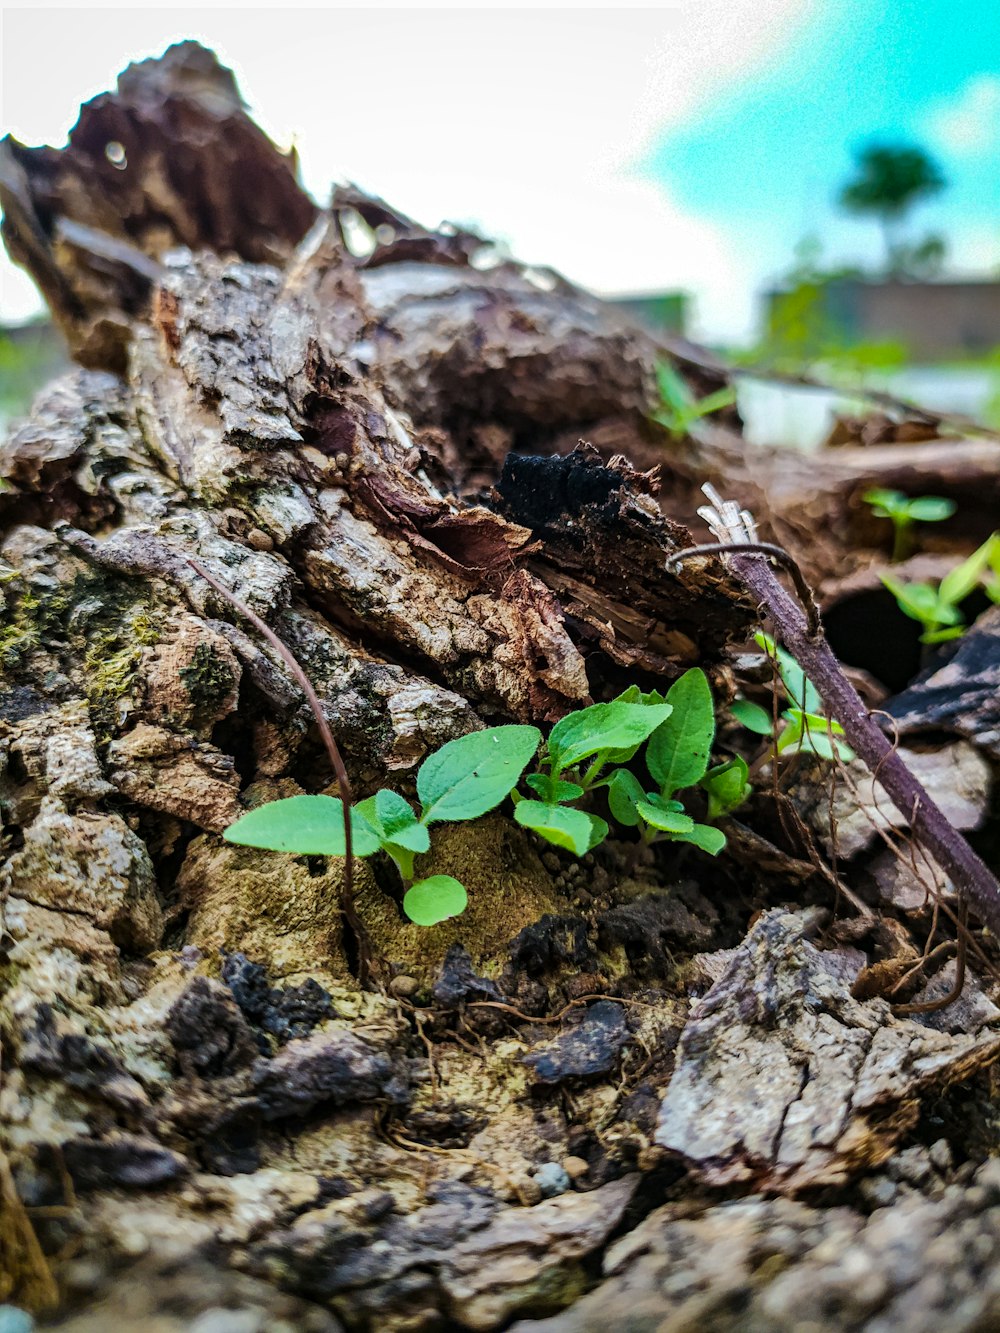 a small plant growing out of the bark of a tree